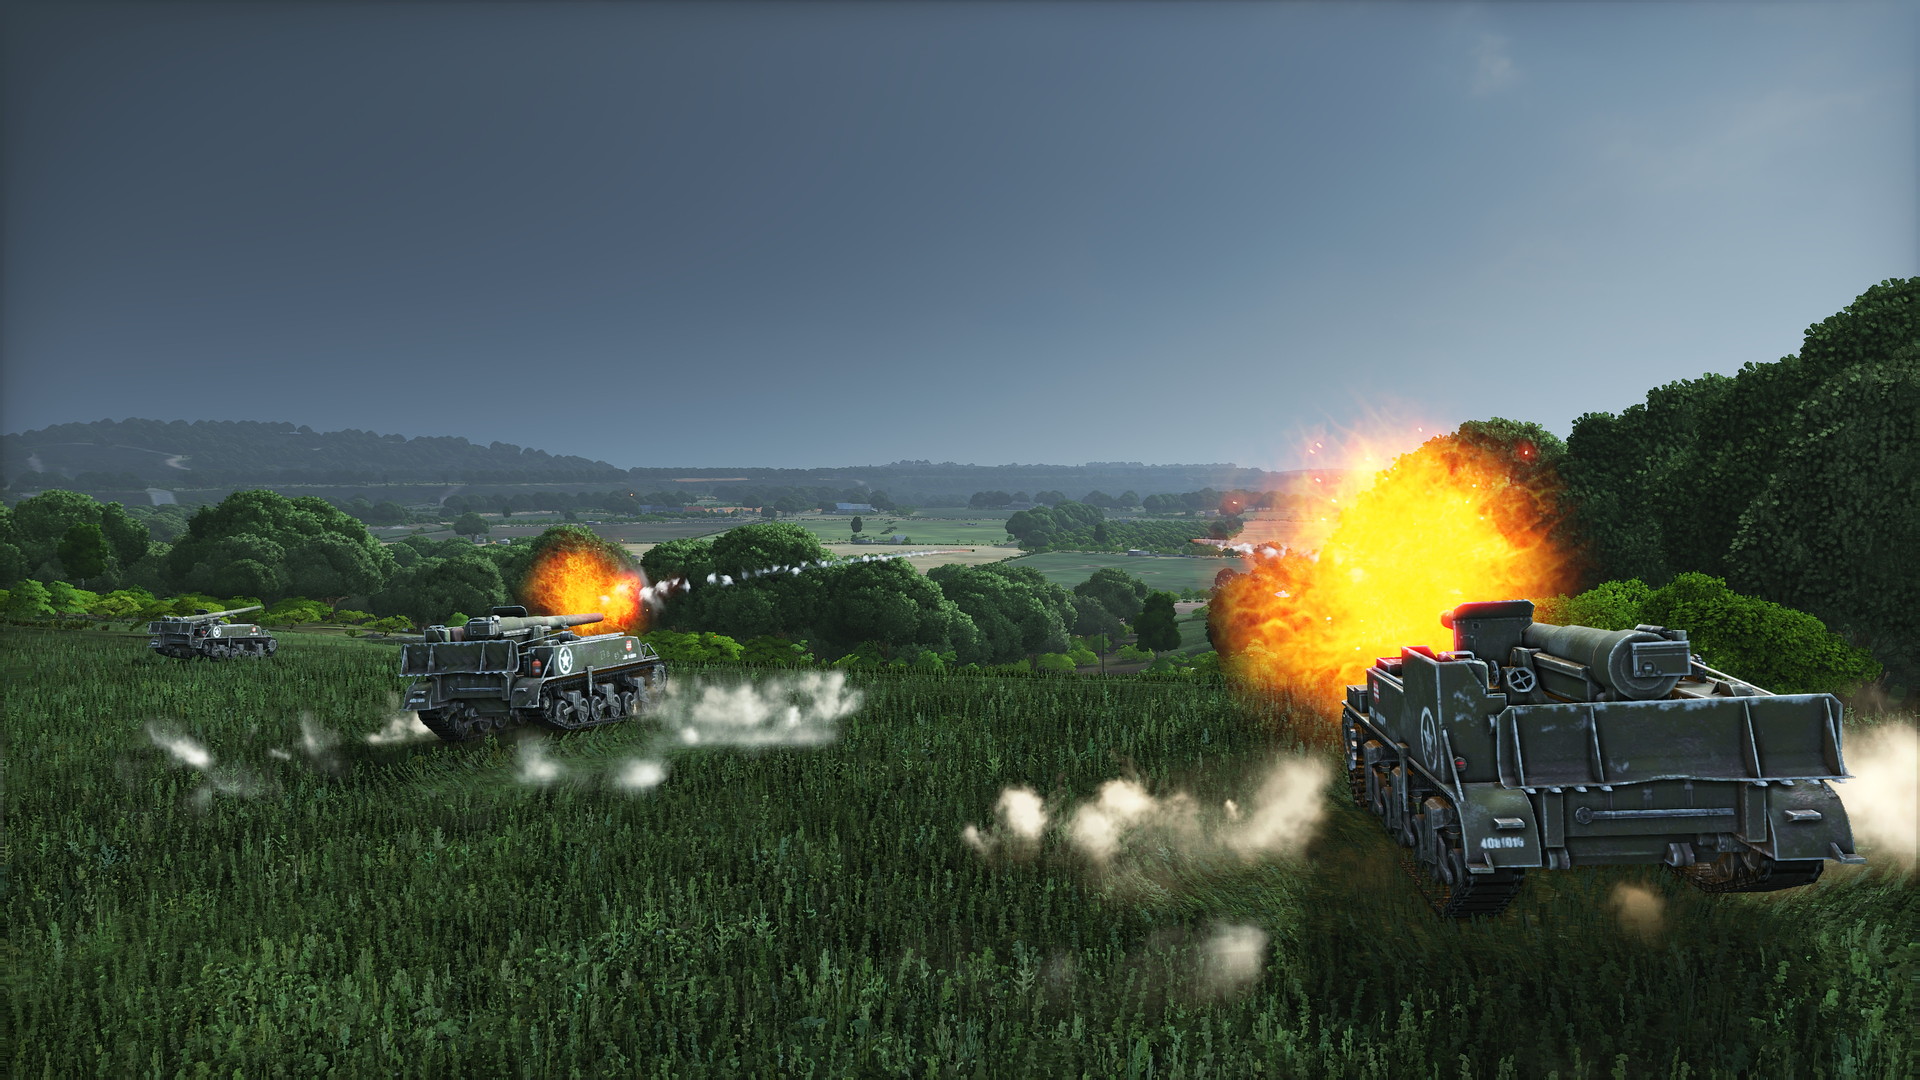 Steel Division: Normandy 44 - Second Wave - screenshot 5